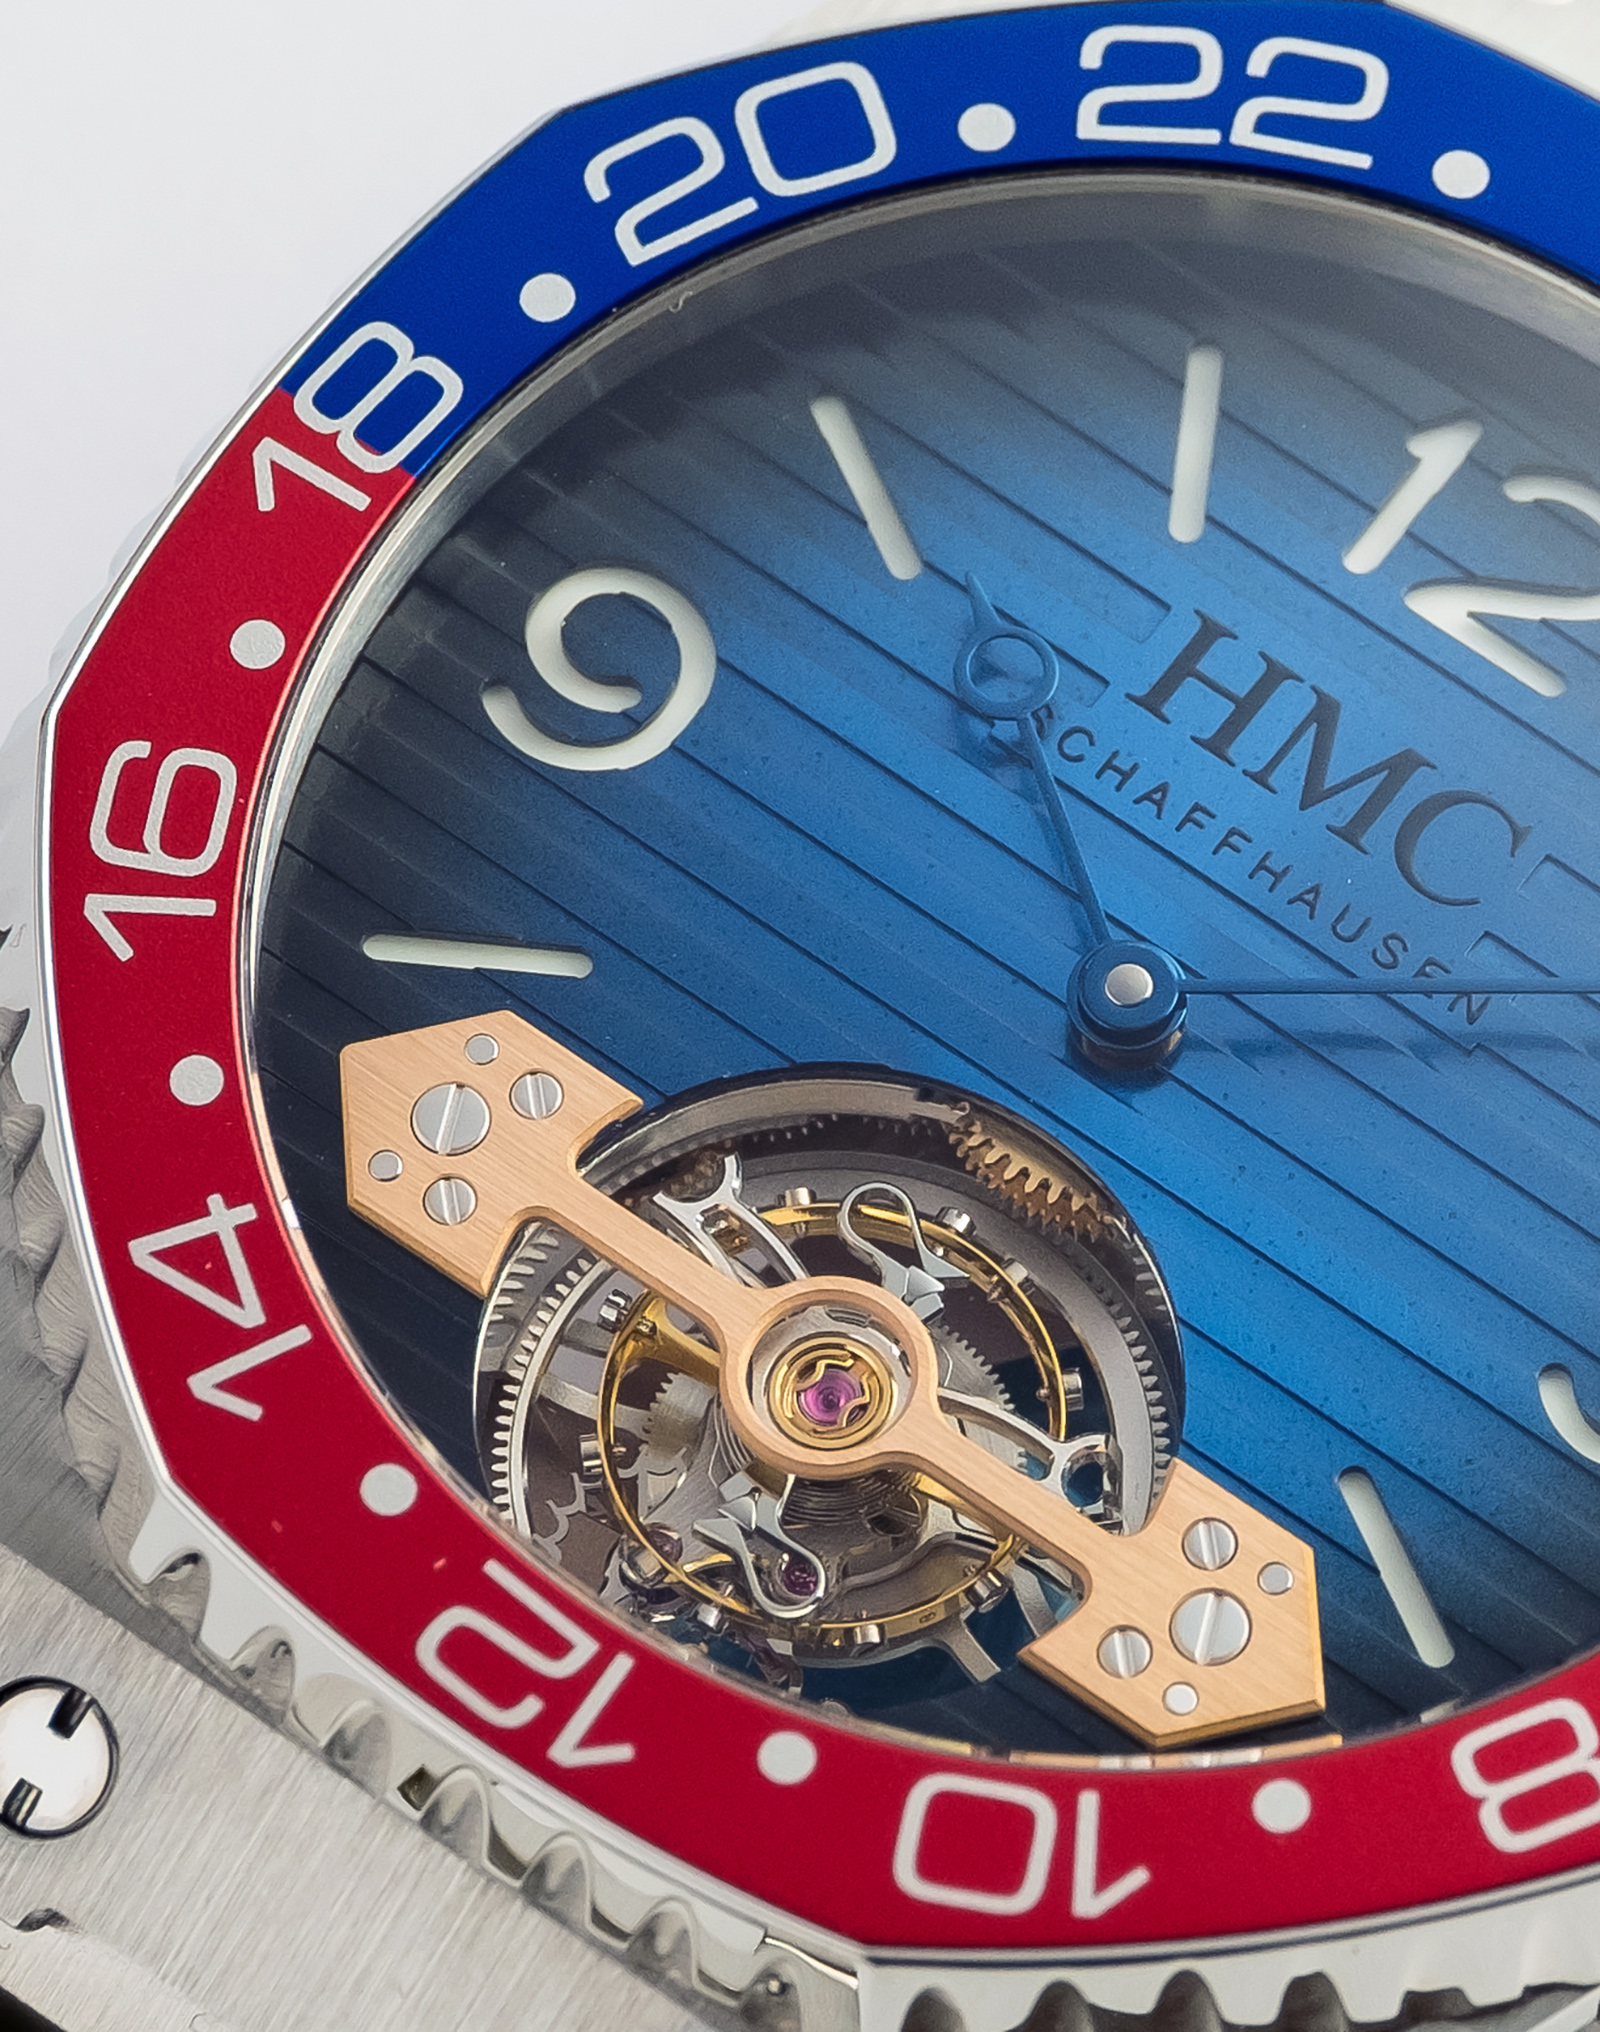 H.Moser & Cie Swiss Icons Watch_3804-1200_Lifestyle_1